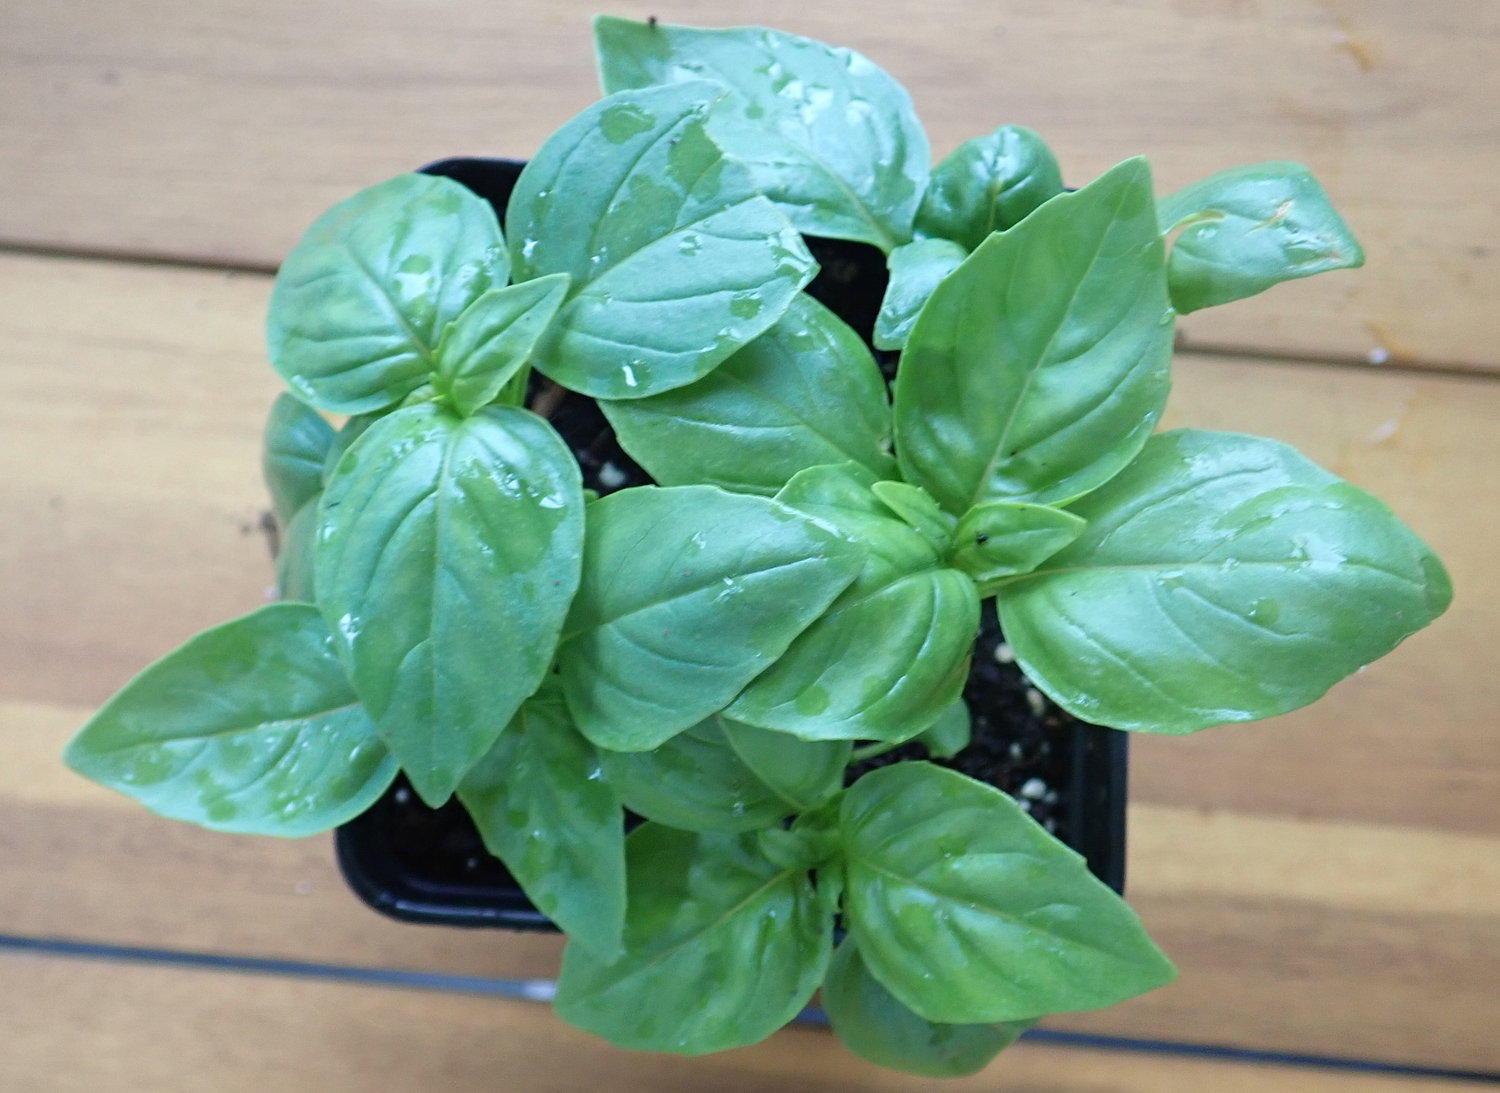  Basil requires temperatures of 70°F Use cilantro leaves fresh, as they lose their Dill can be cut as a microgreen, or at (21°C) or warmer to thrive. 